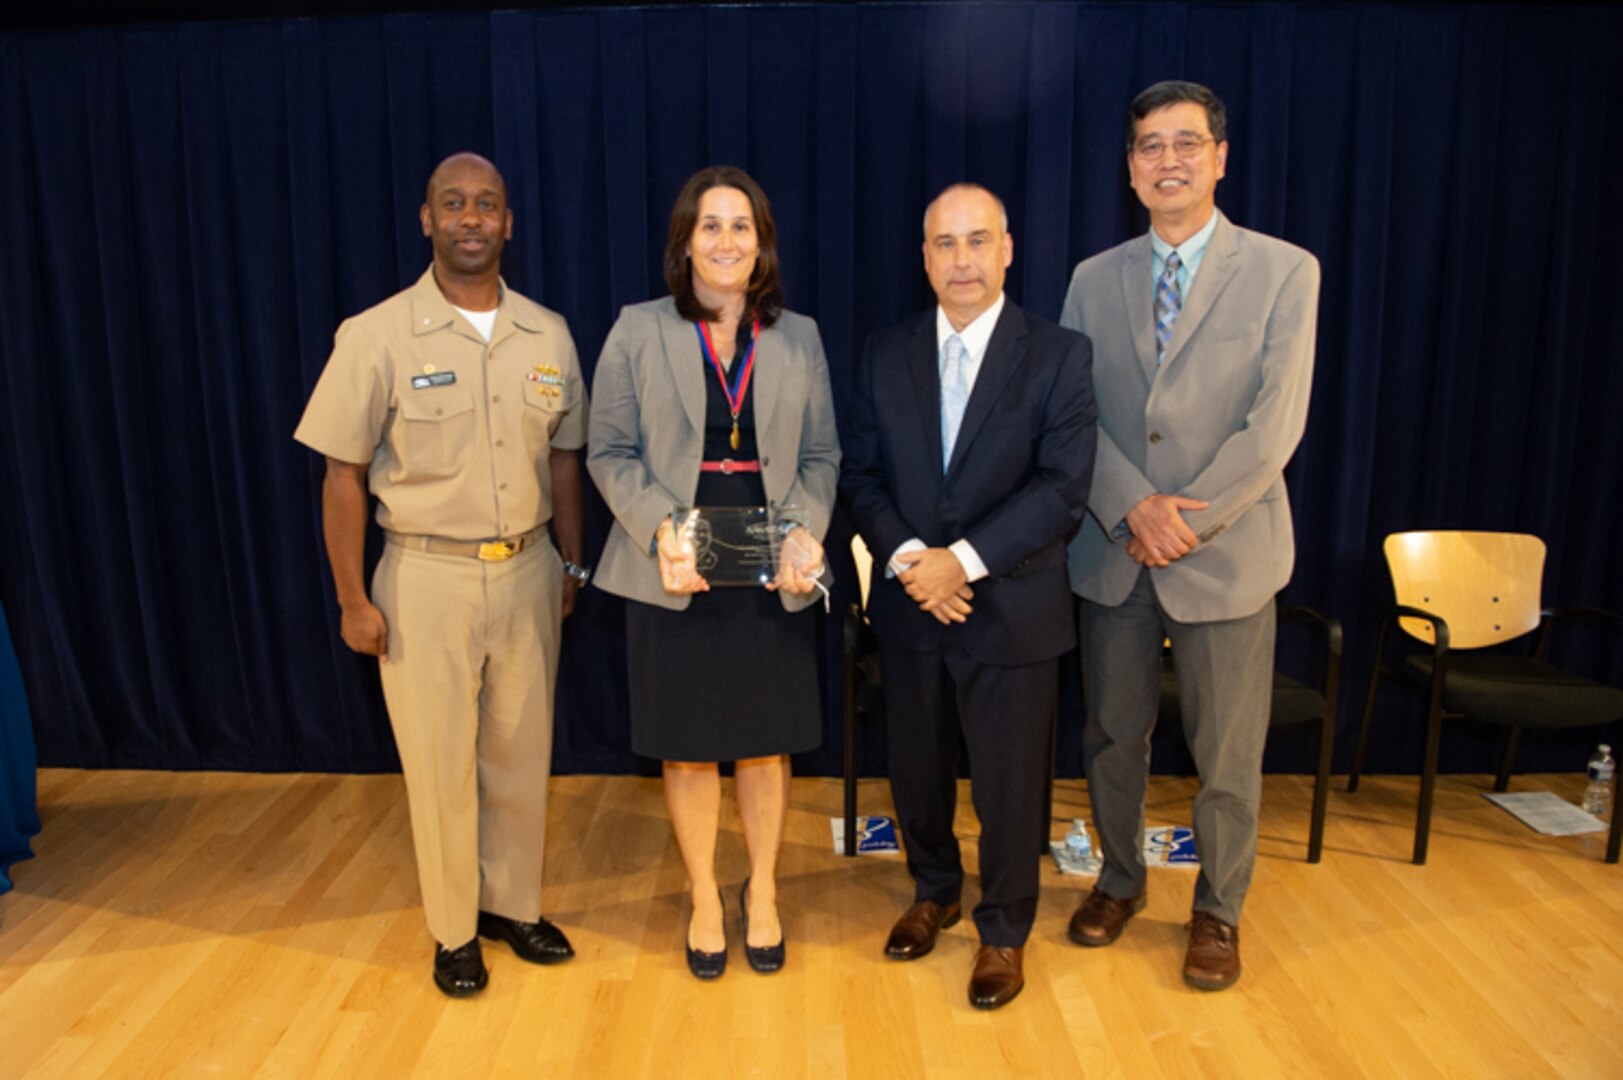 Dr. Anne Fullerton, head of the Emergent Technology Branch, receives the Rear Adm. David Taylor Award the Naval Surface Warfare Center, Carderock Division Honor Awards on Sept. 10, 2019, in West Bethesda, Md. With Fullerton is Commanding Officer Capt. Cedric McNeal, Technical Director Larry Tarasek and Ship Signatures Department Head Dr. Paul Shang. (U.S. Navy photo by Nicholas Brezzell/Released)